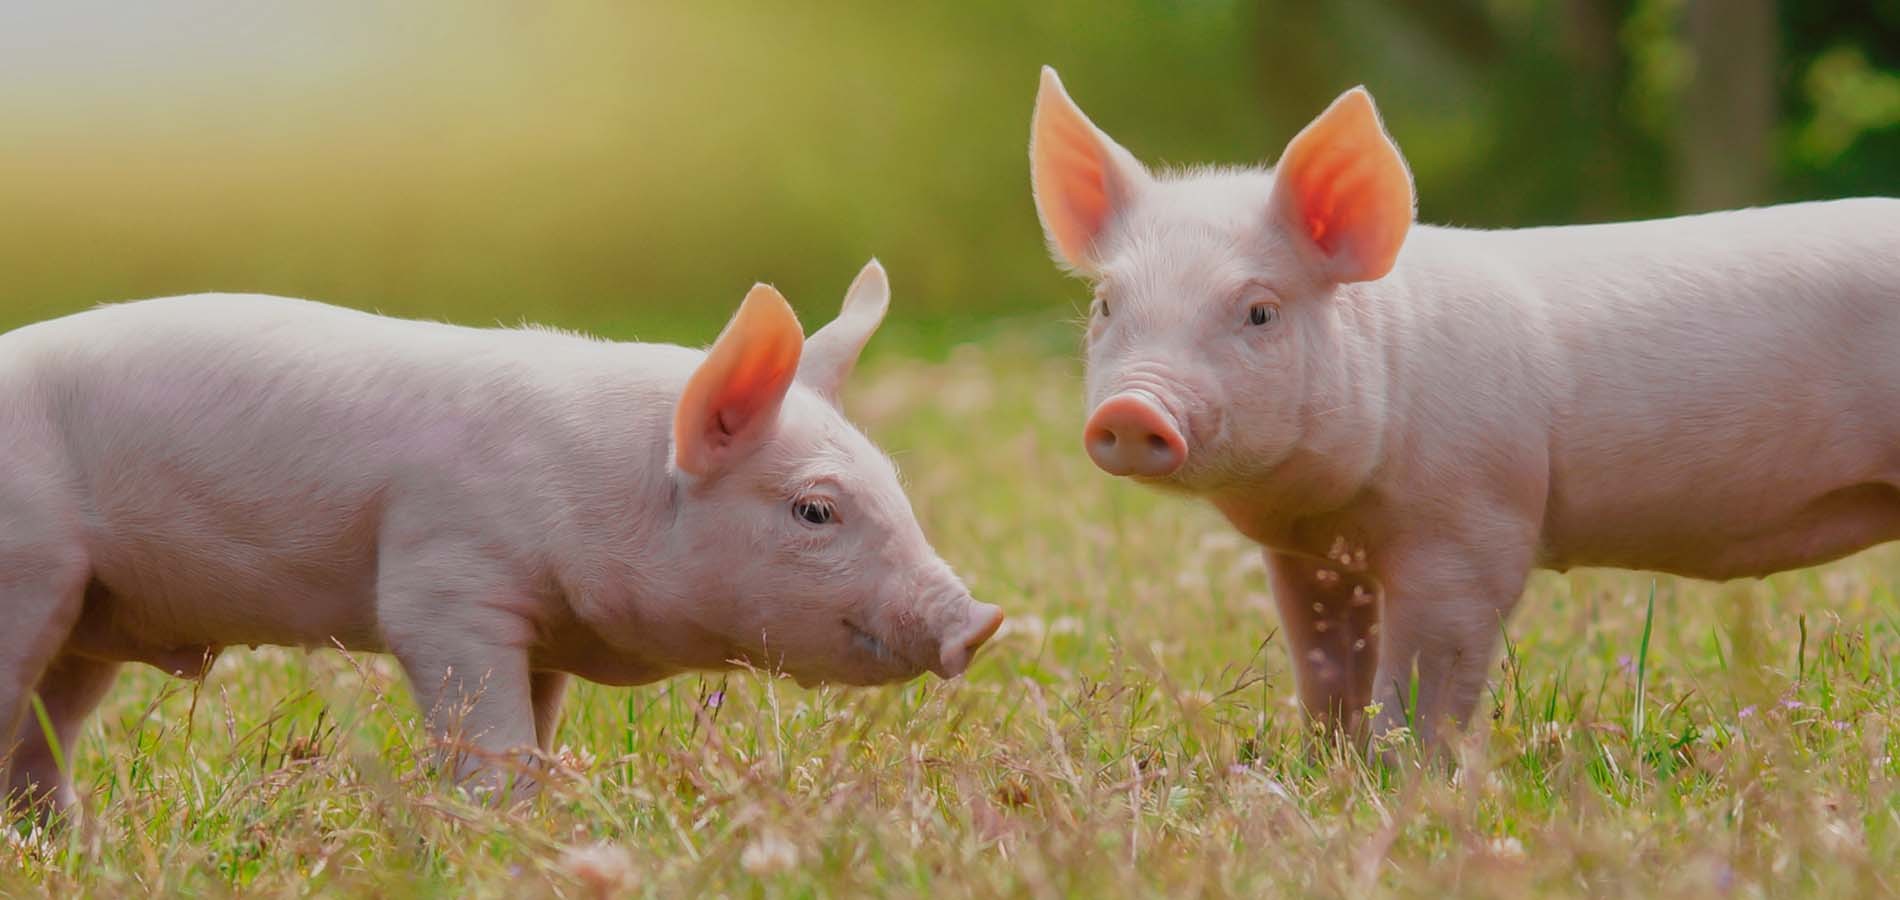 Discover our kit for African Swine Fever detection